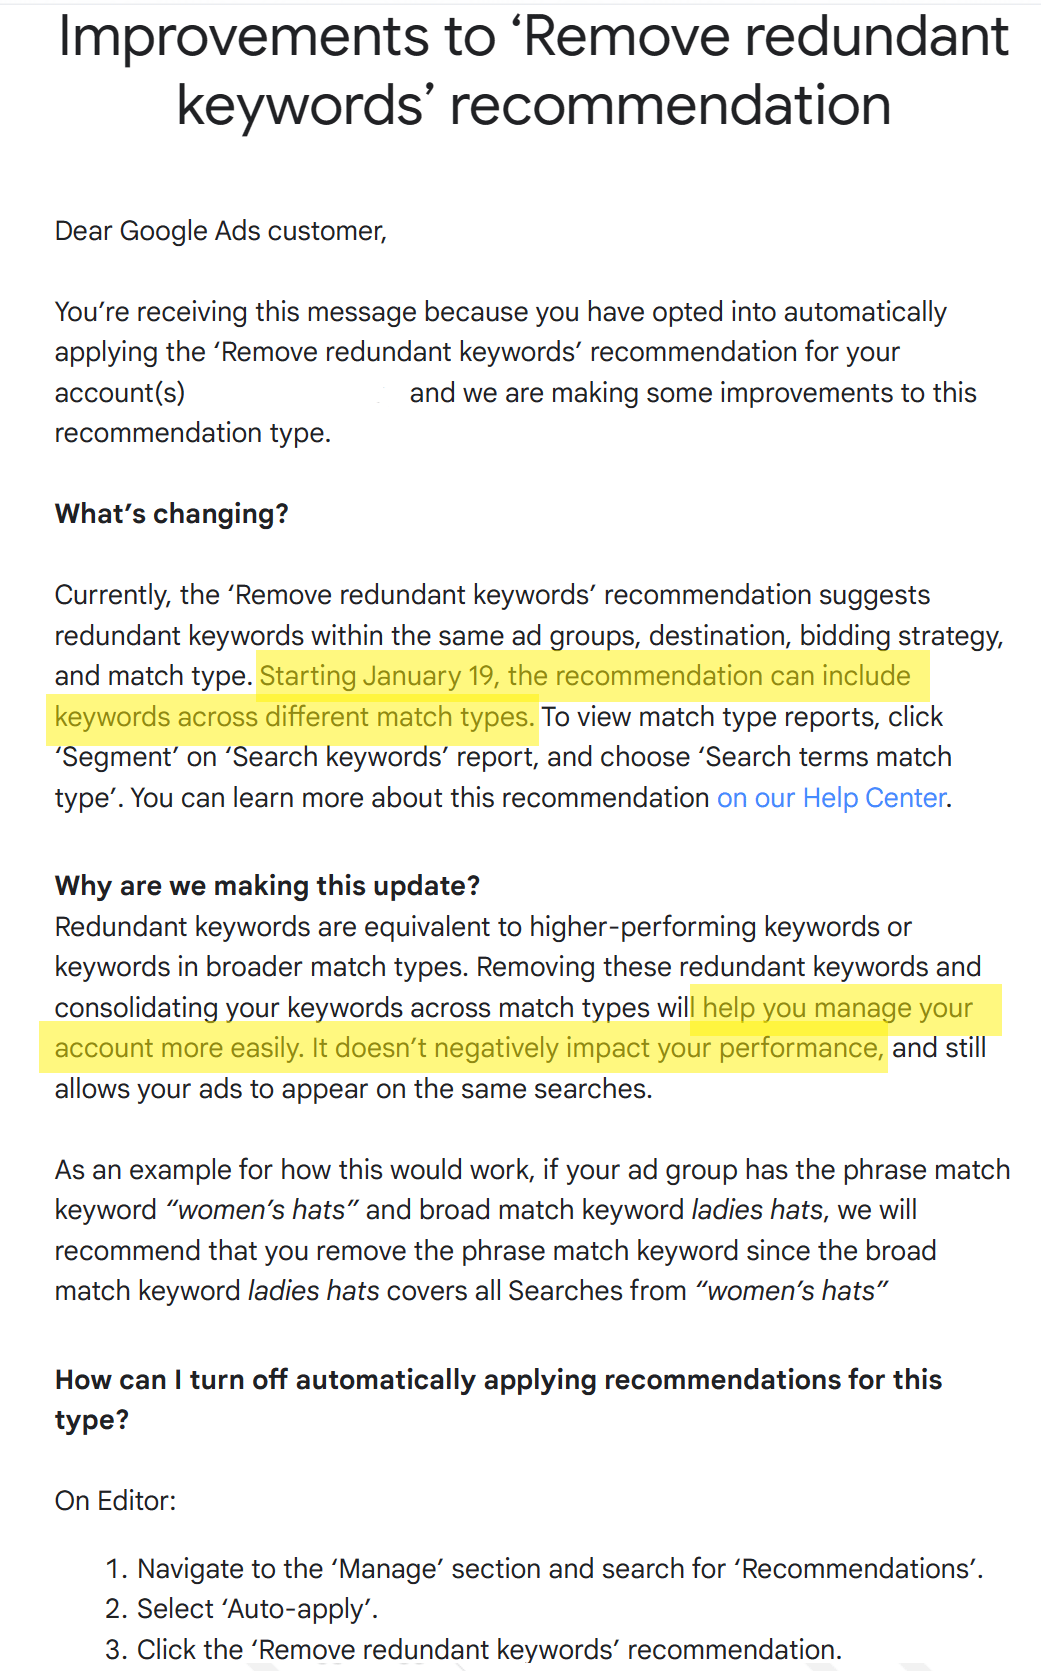 Google's change to redundant keyword policy will go into effect on January 19, 2023.